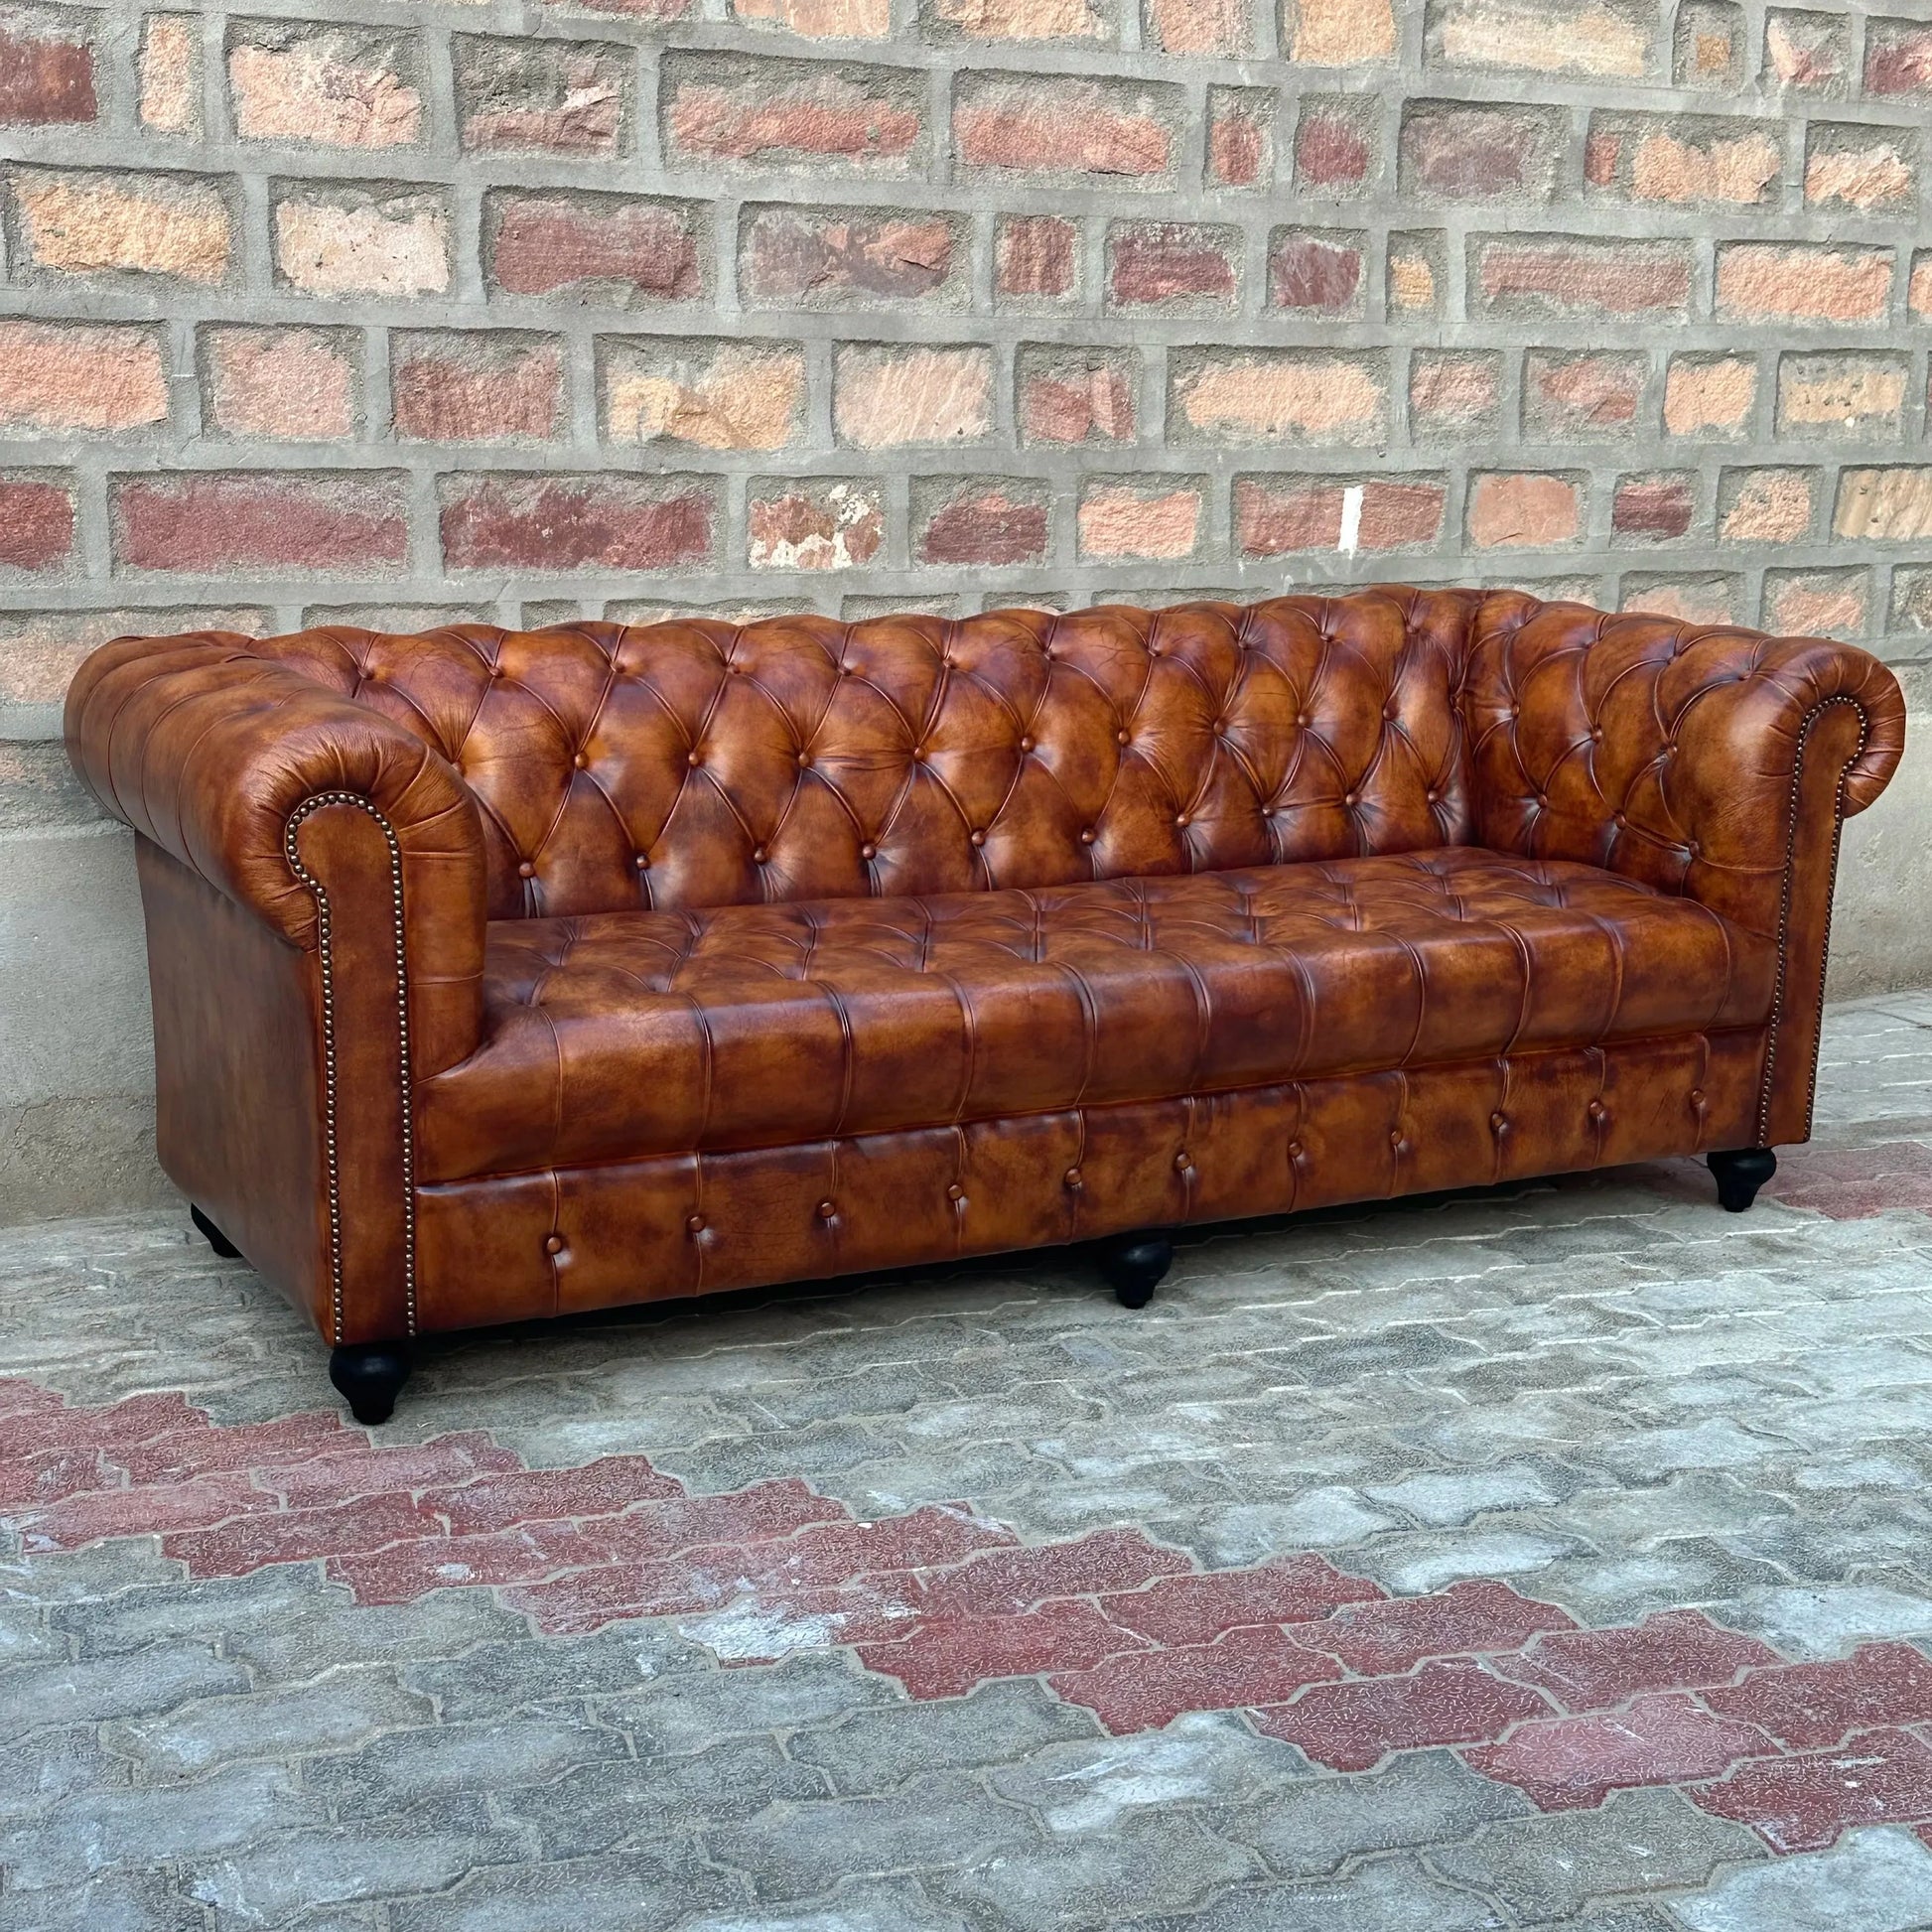 87" Sofa Tufted Bench | Laramie Chesterfield Leather Sofa with Tufted Bench Seats (LA-3T) by Rising Tide Design Co.